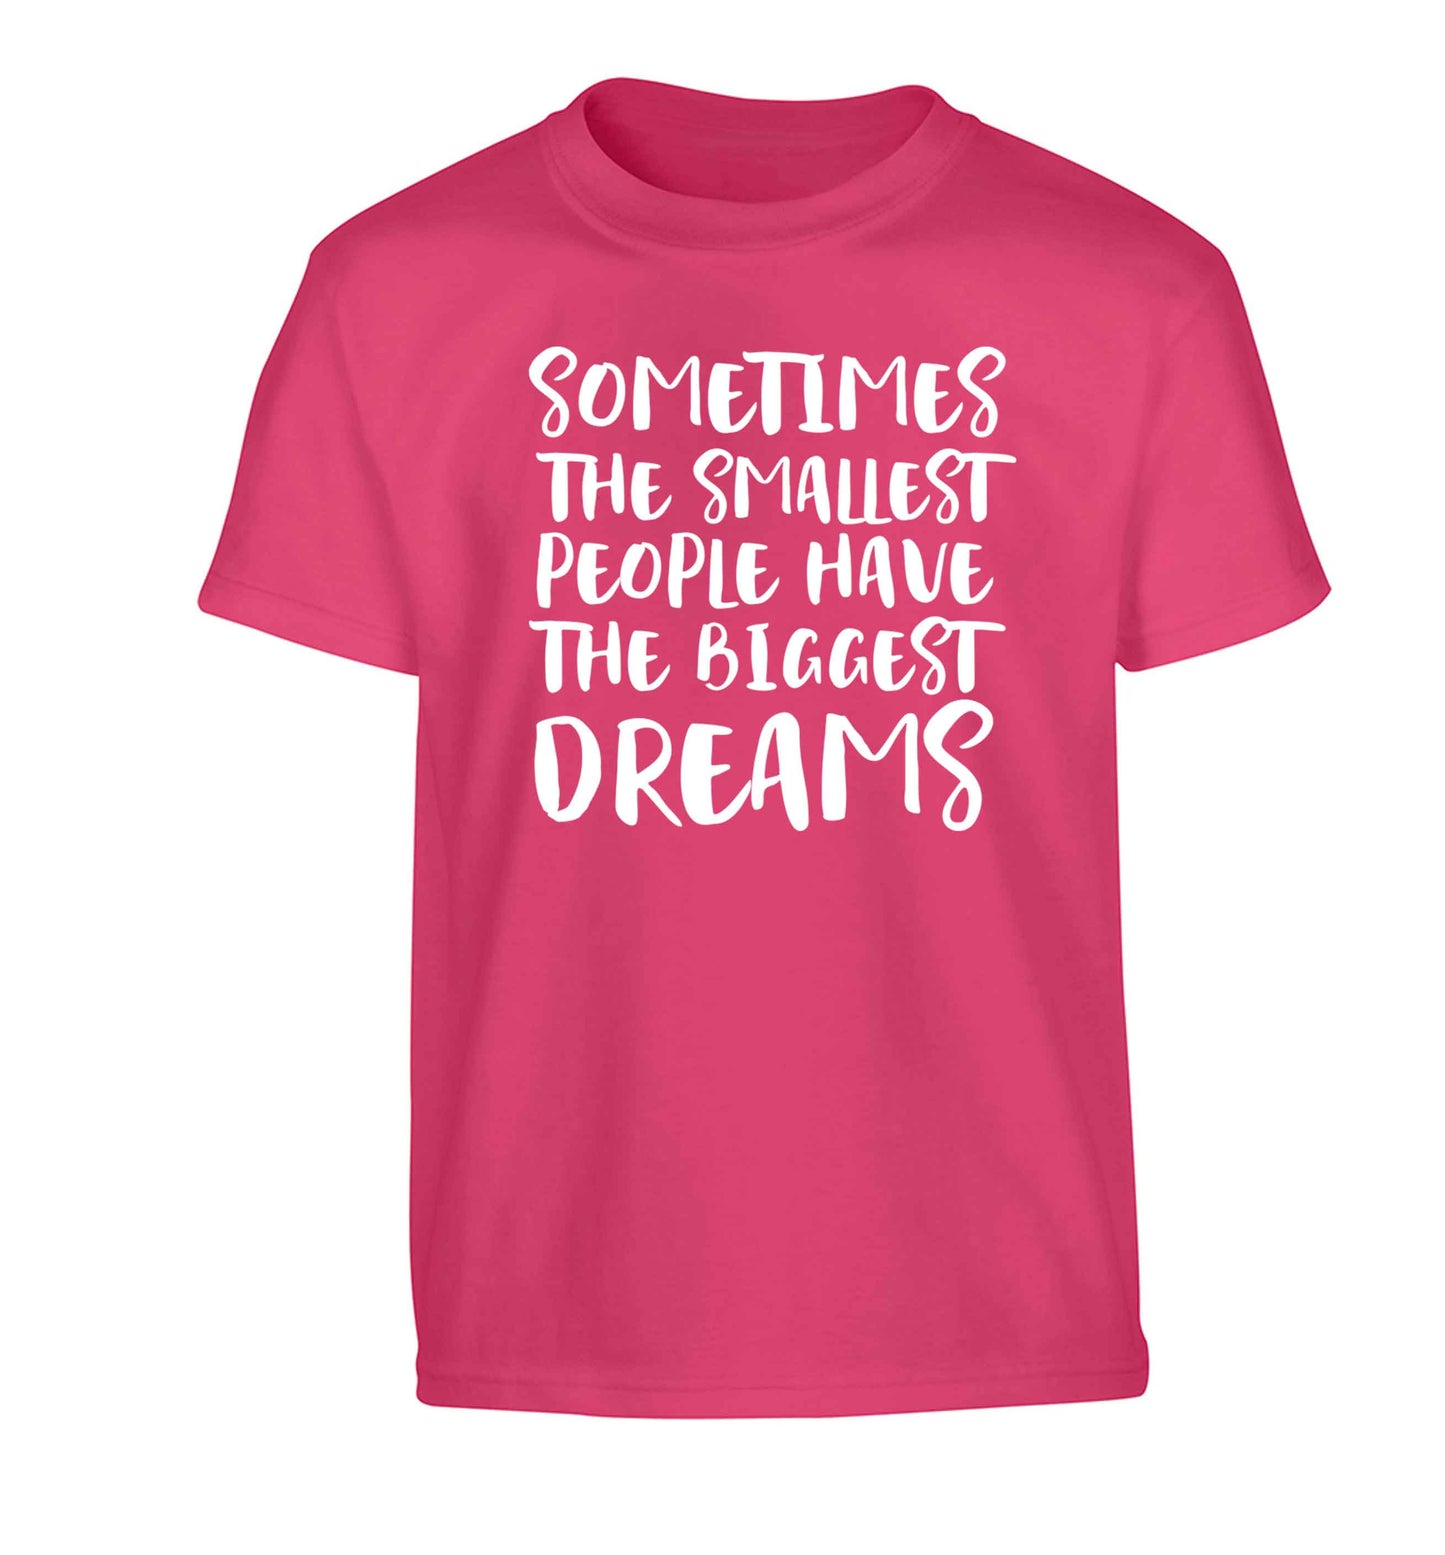 Sometimes the smallest people have the biggest dreams Children's pink Tshirt 12-13 Years